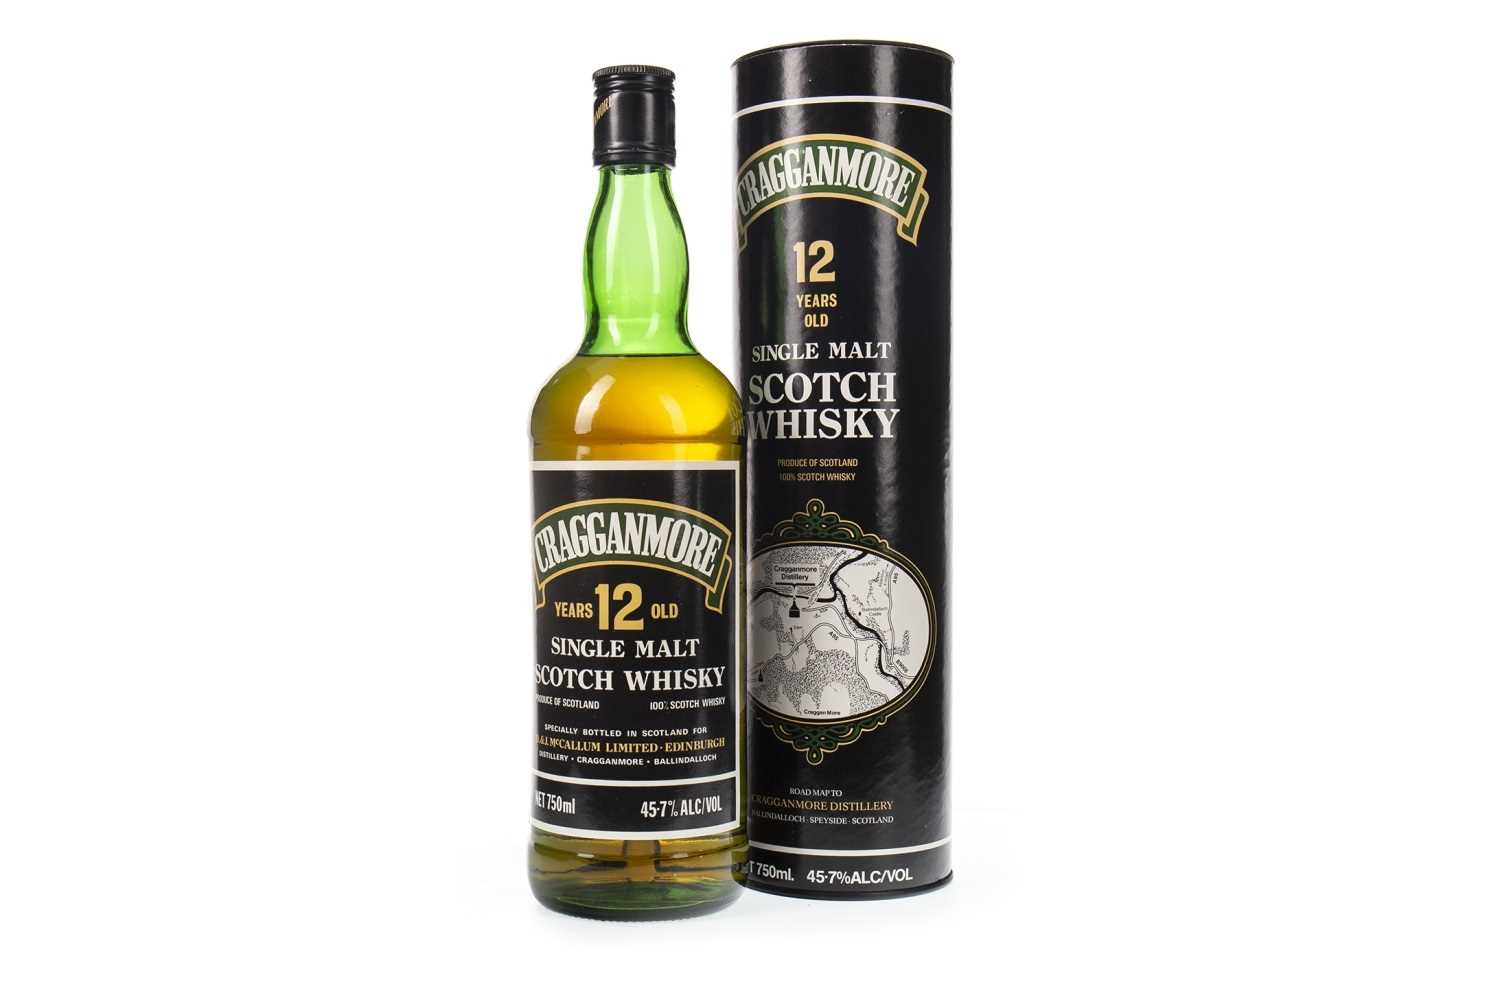 Lot 292 - CRAGGANMORE 12 YEARS OLD